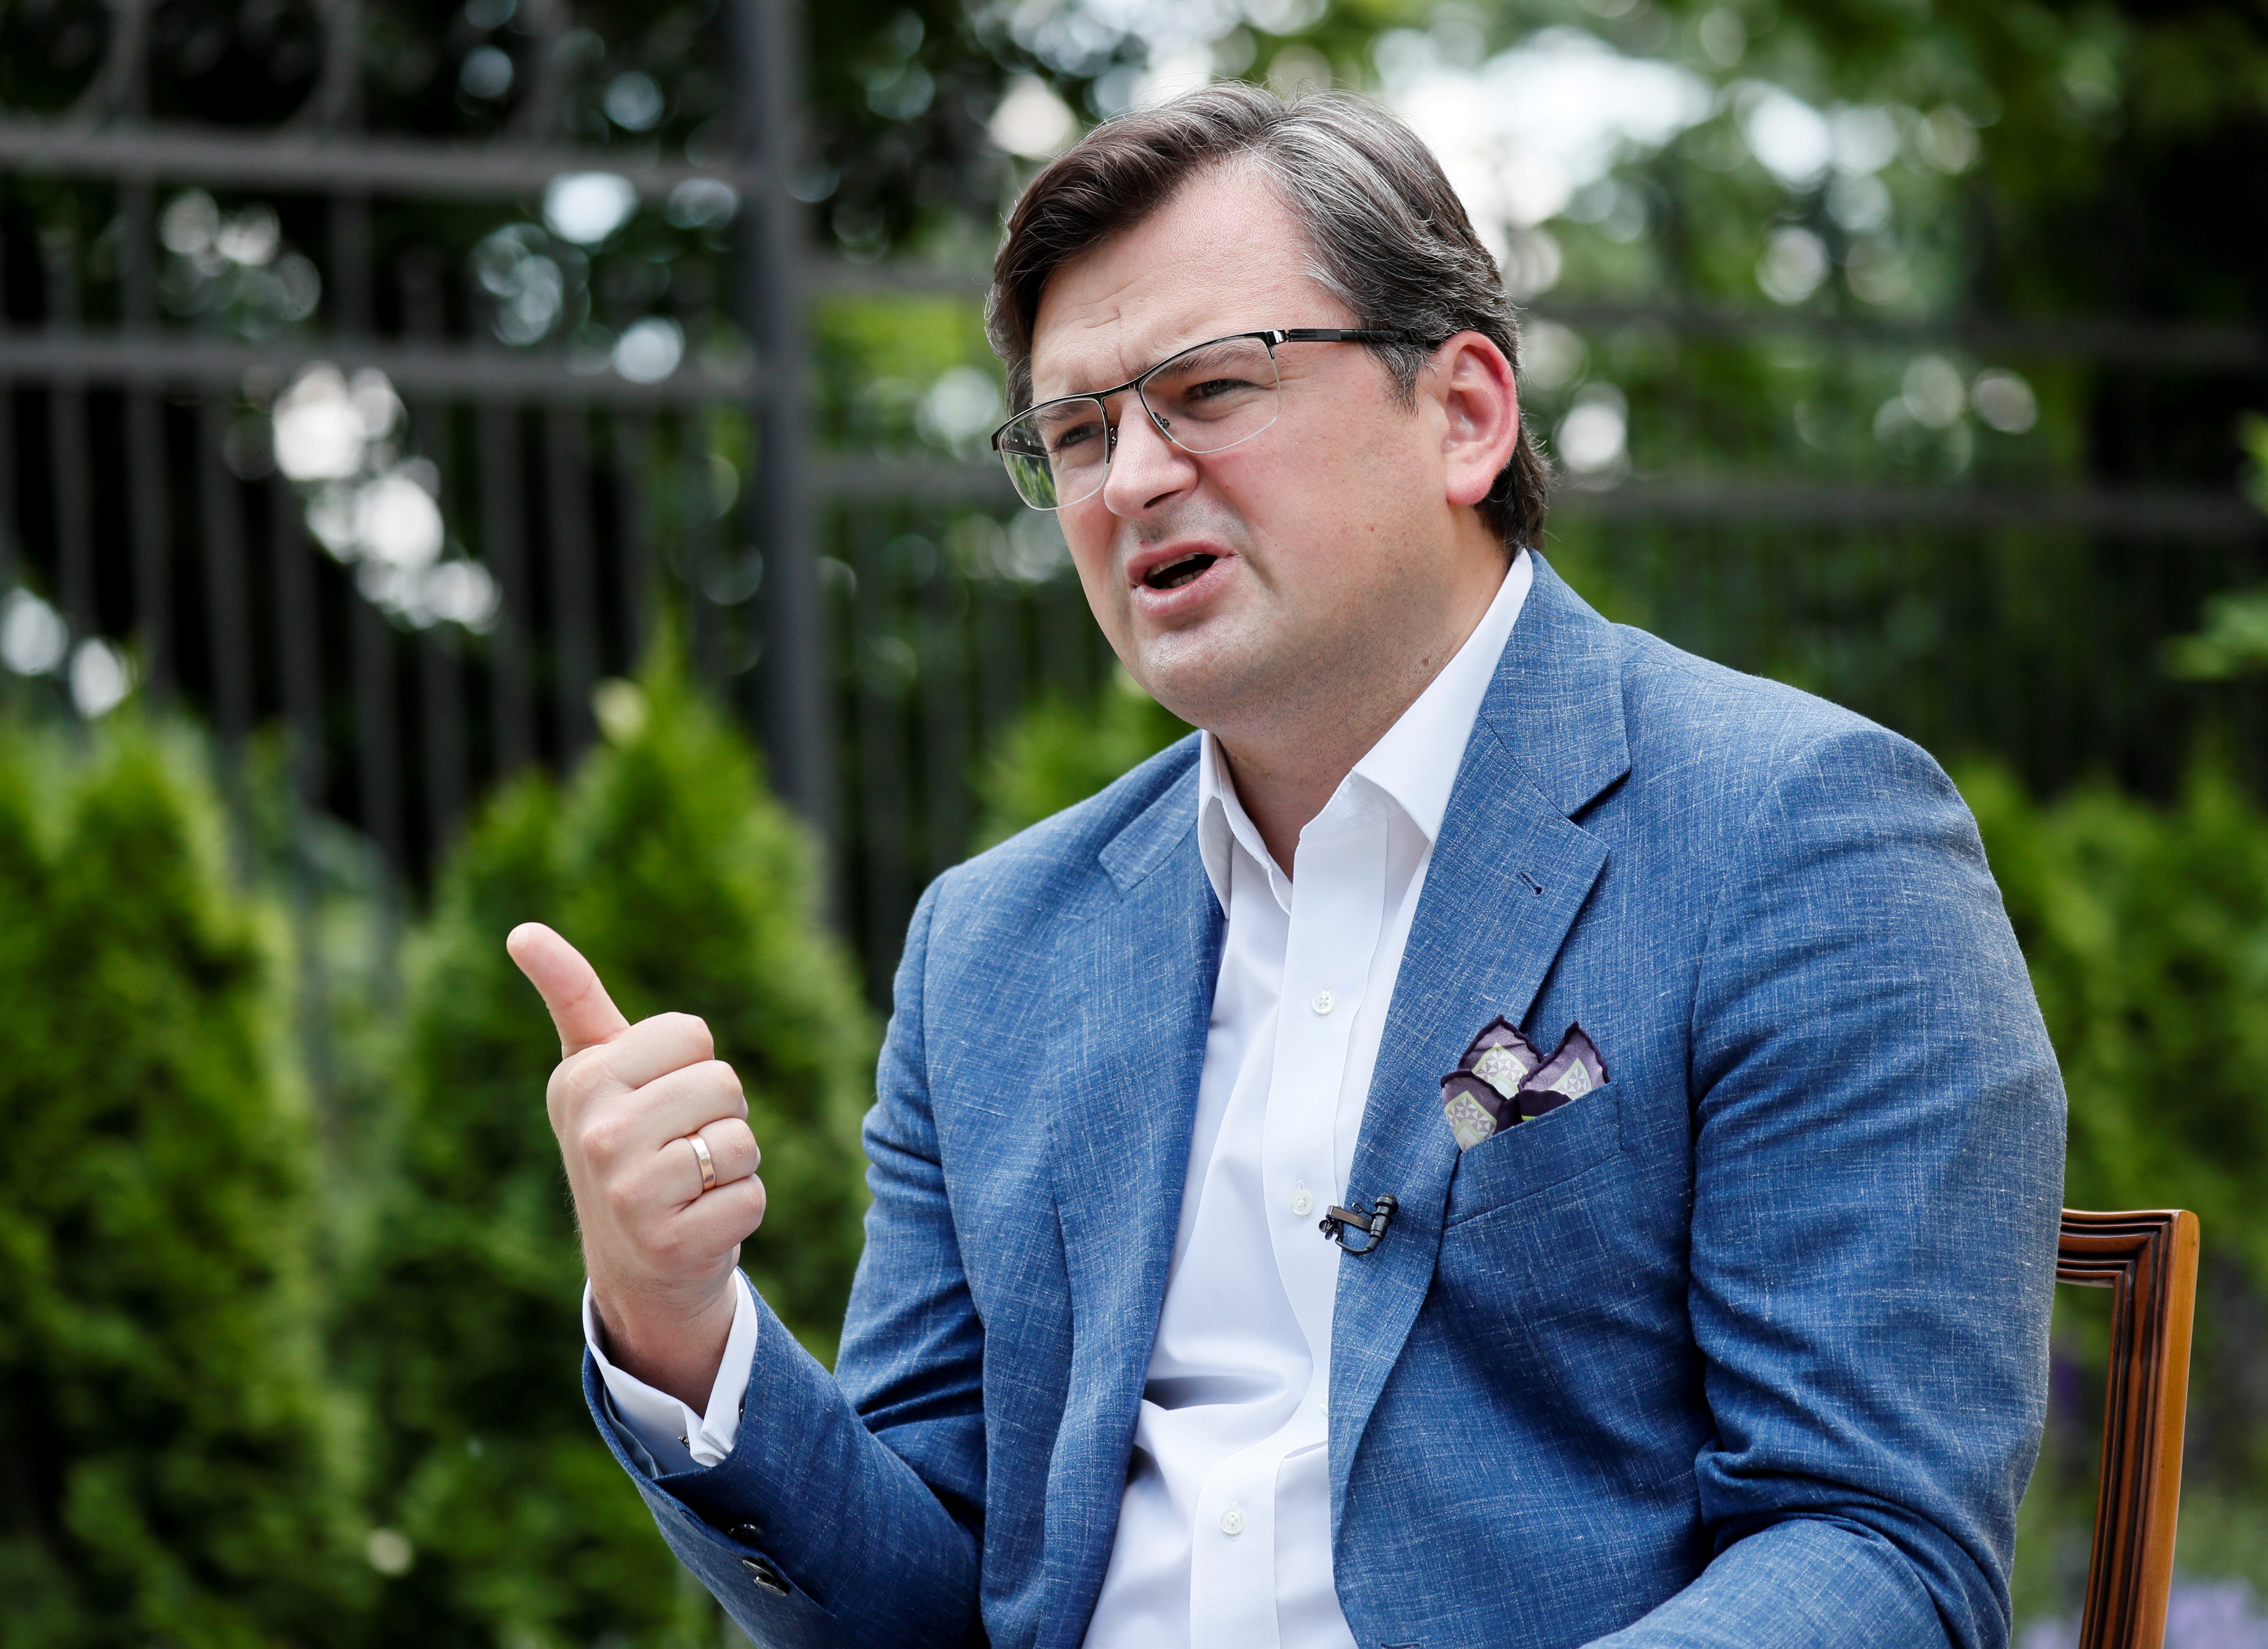 Ukrainian Foreign Minister Kuleba speaks during an interview in Kyiv